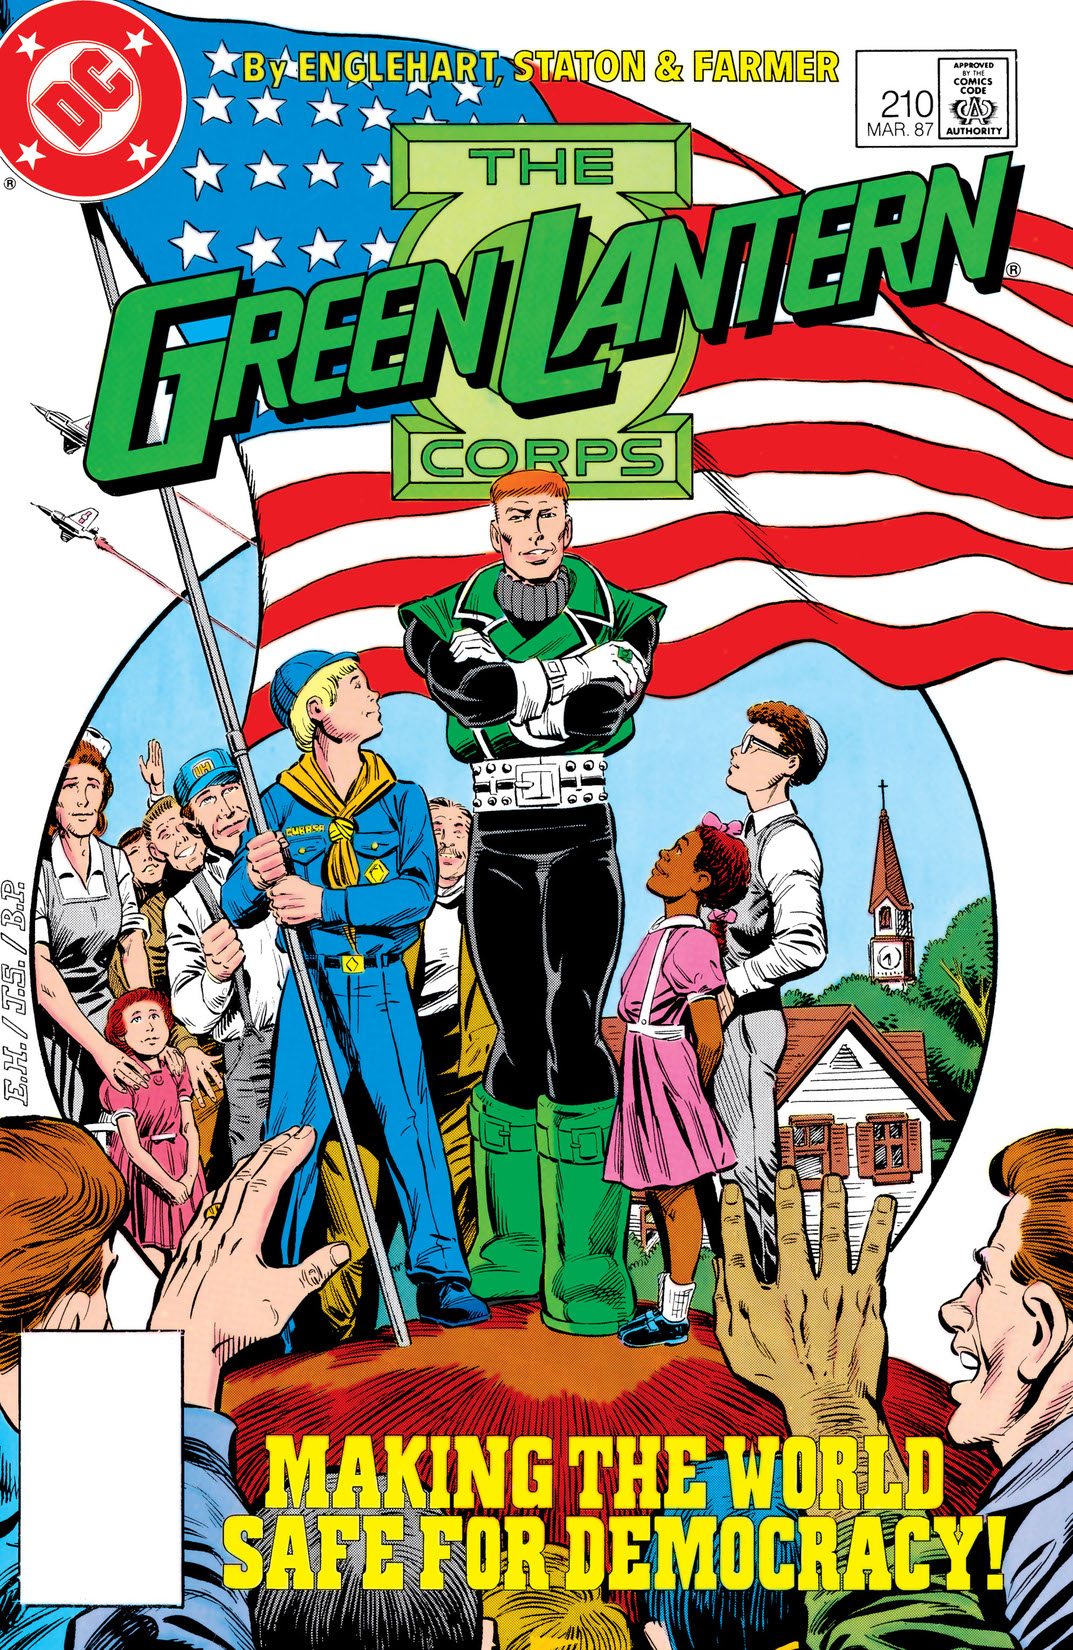 Green Lantern Corps (1986-) #210 preview images